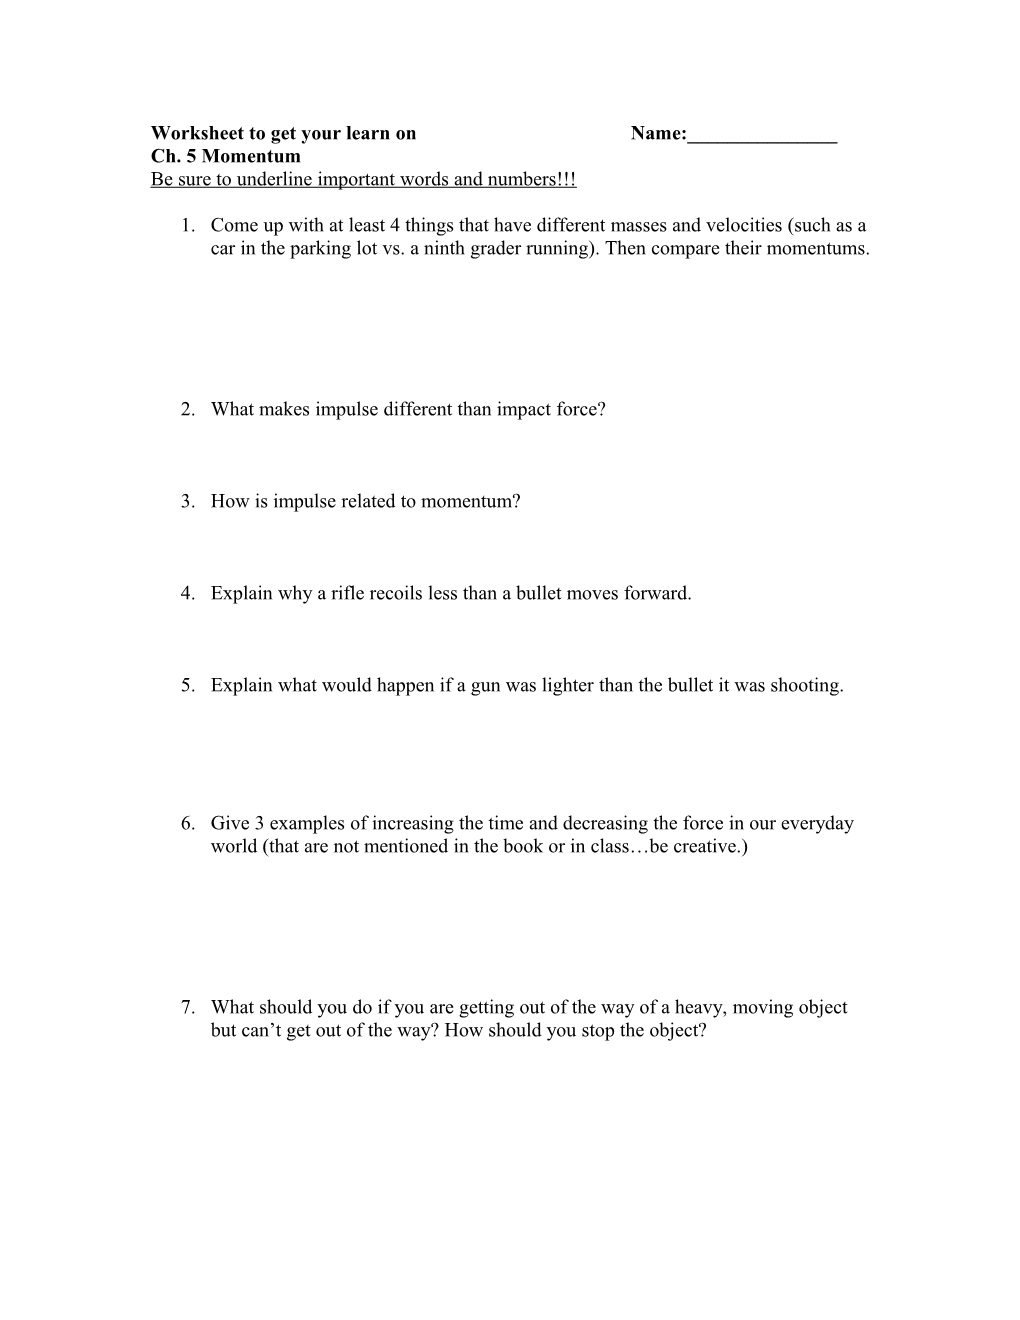 Worksheet to Get Your Learn On